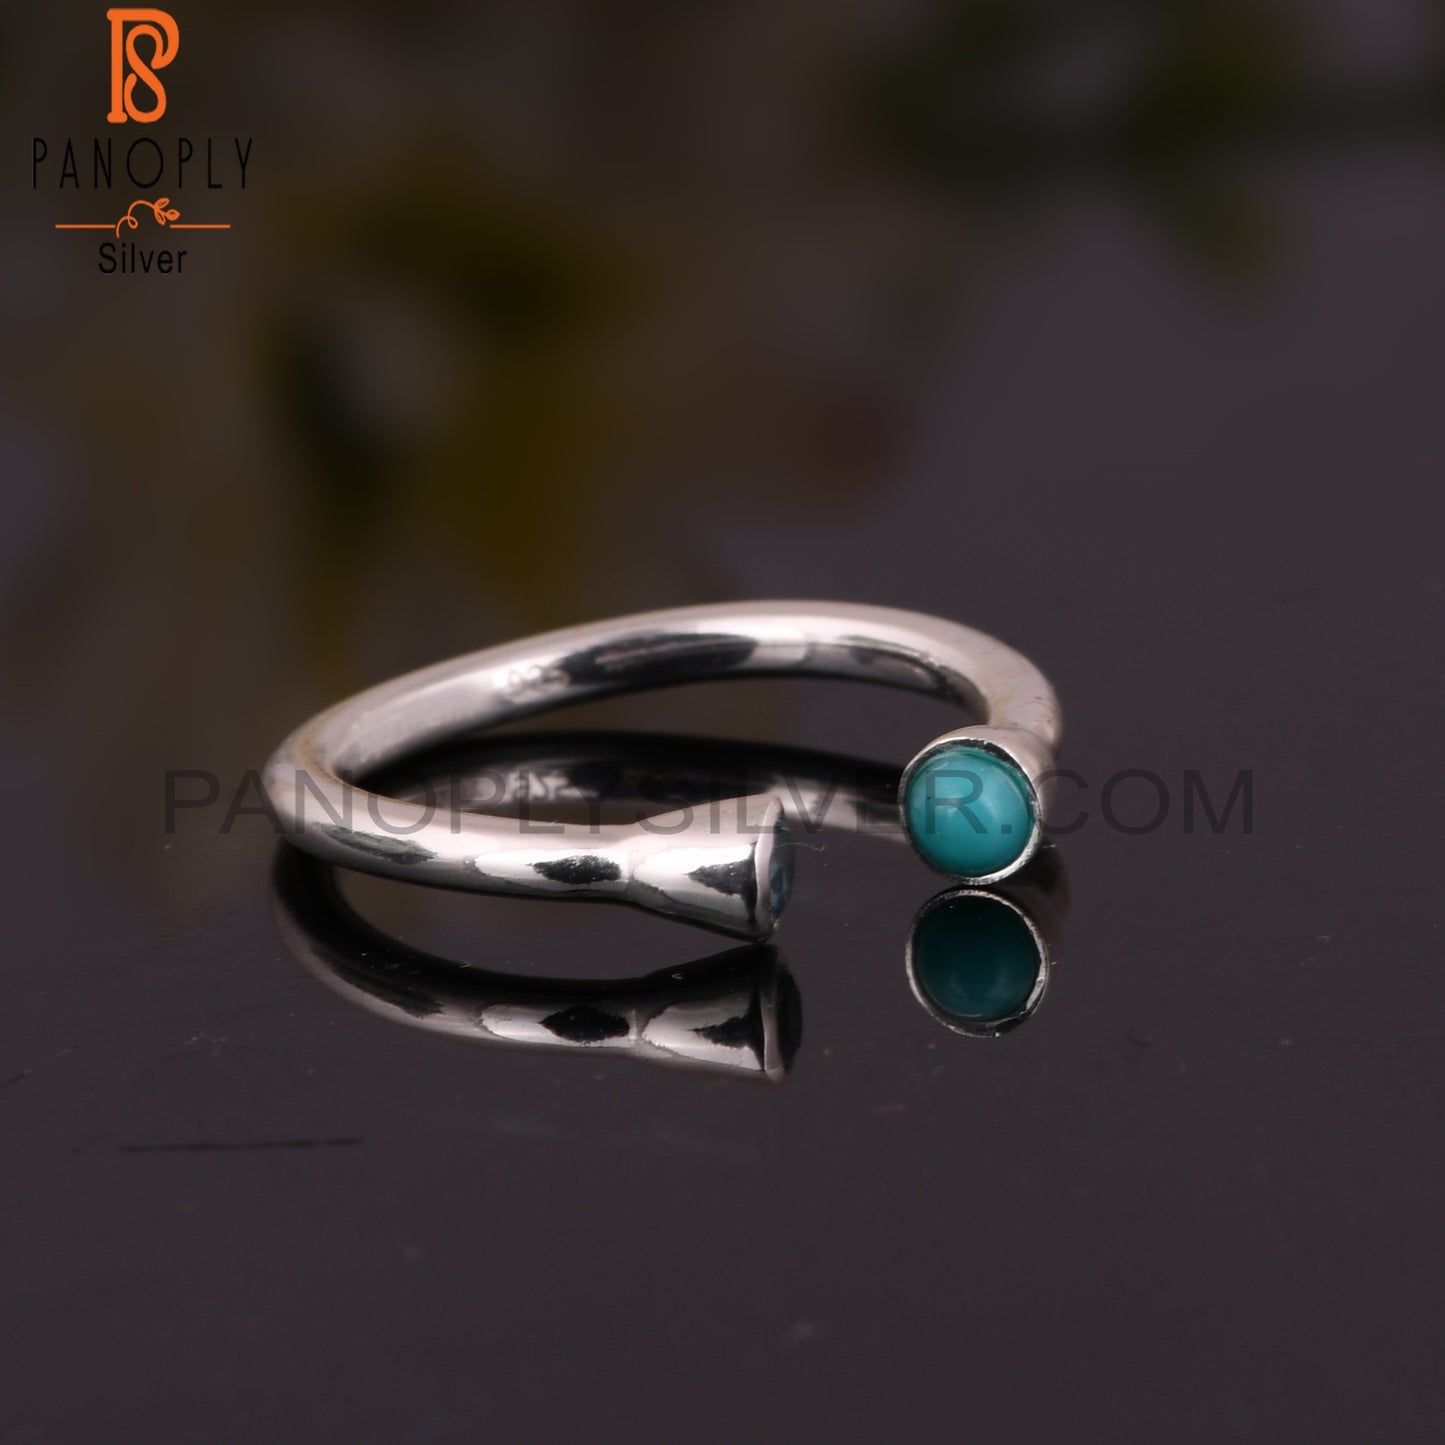 925 Sterling Silver Arizona Turquoise & Blue Topaz Ring